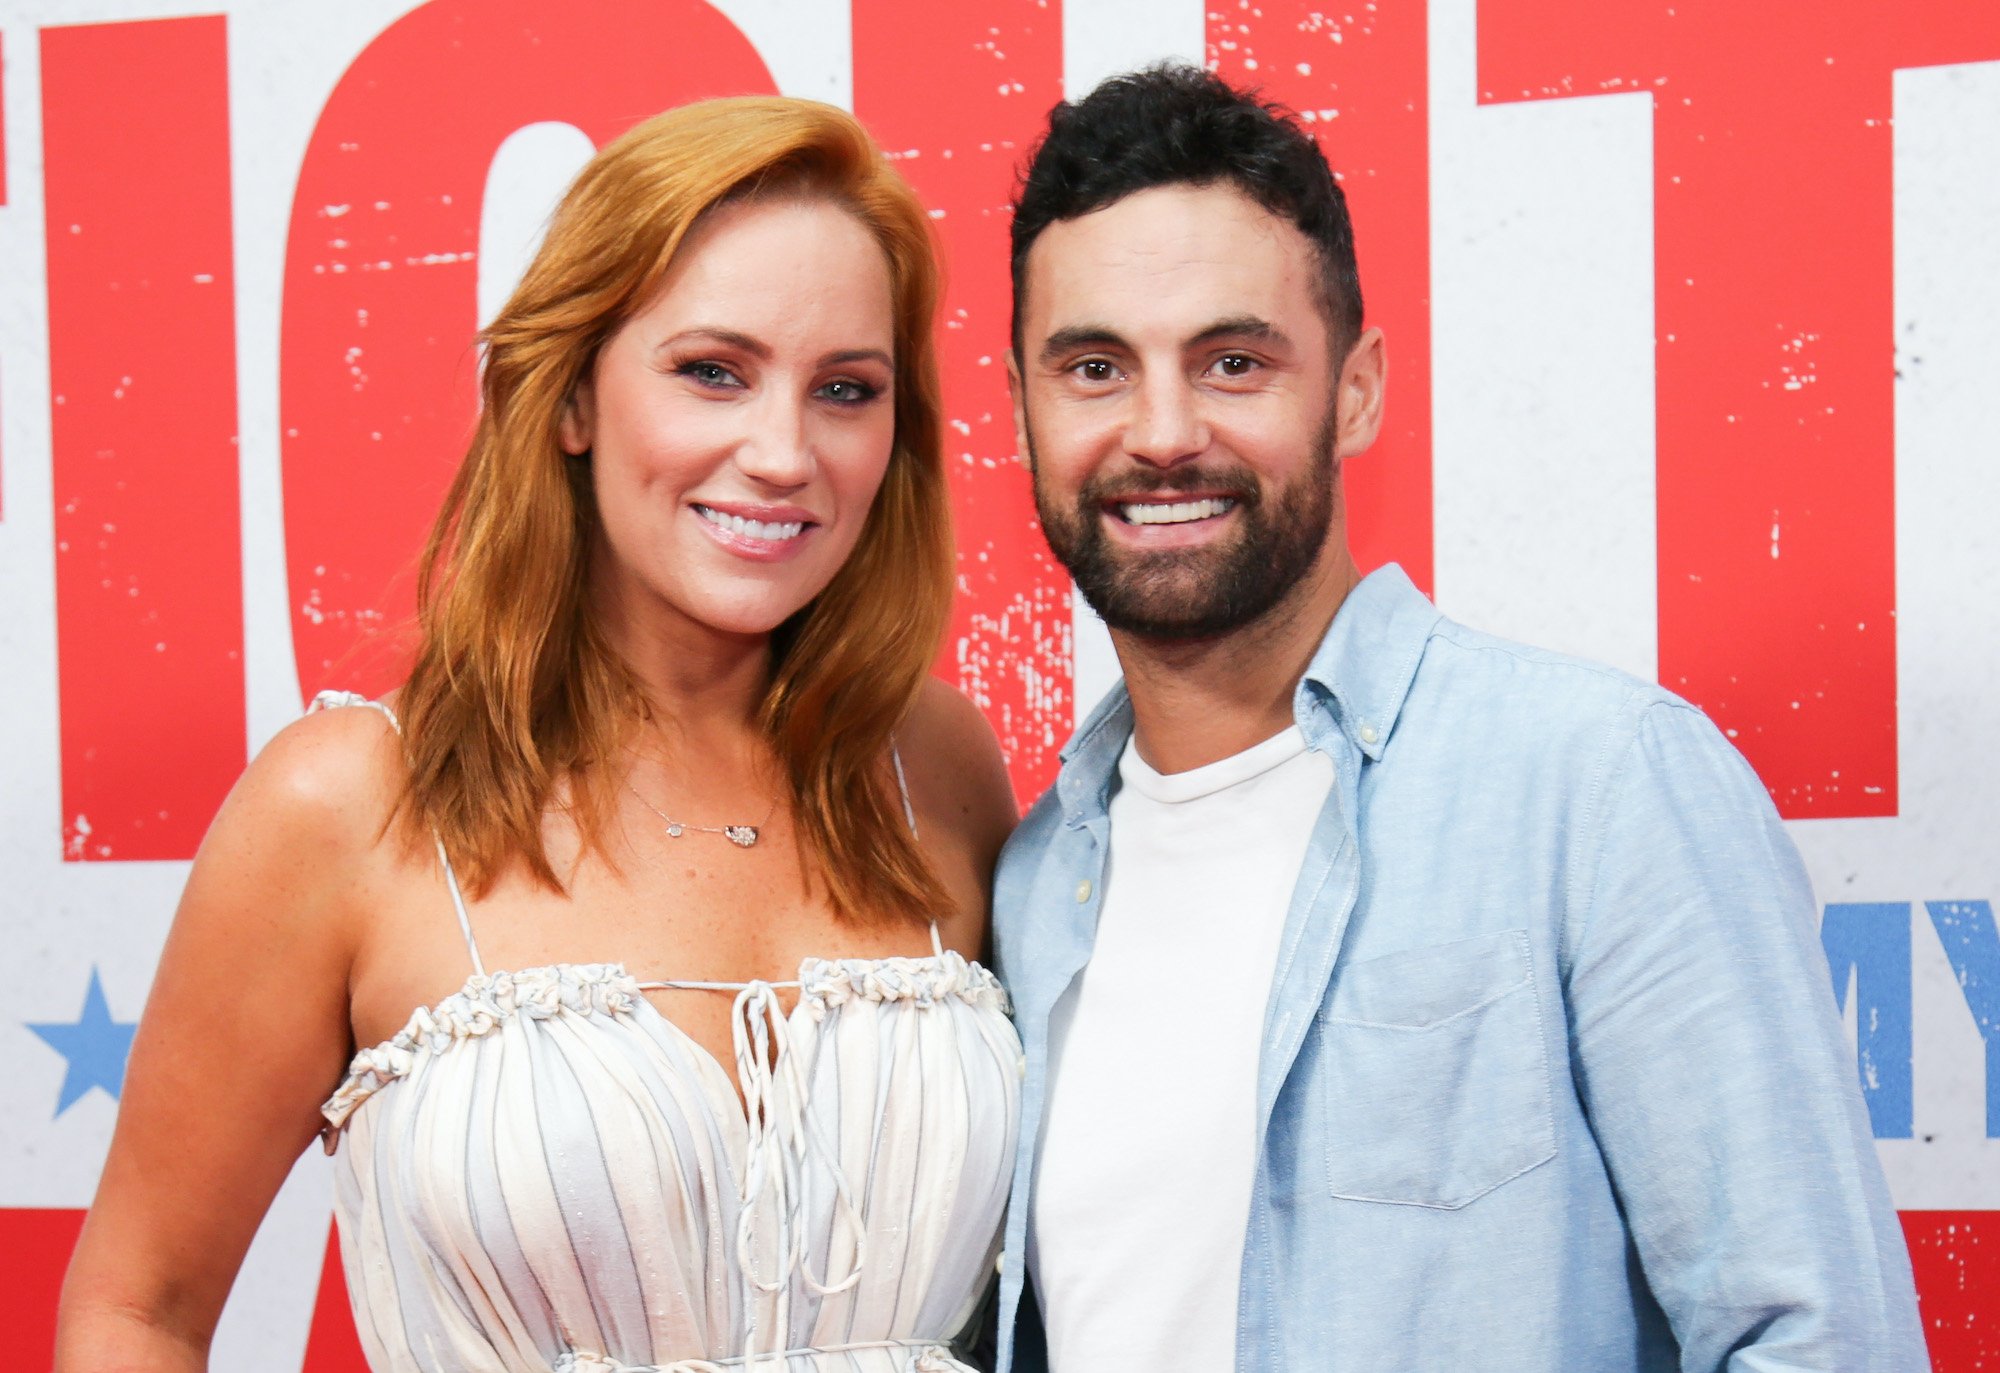 New Series Of Married At First Sight Australia - 'Married at First Sight Australia': Which Couples From Season 6 Are